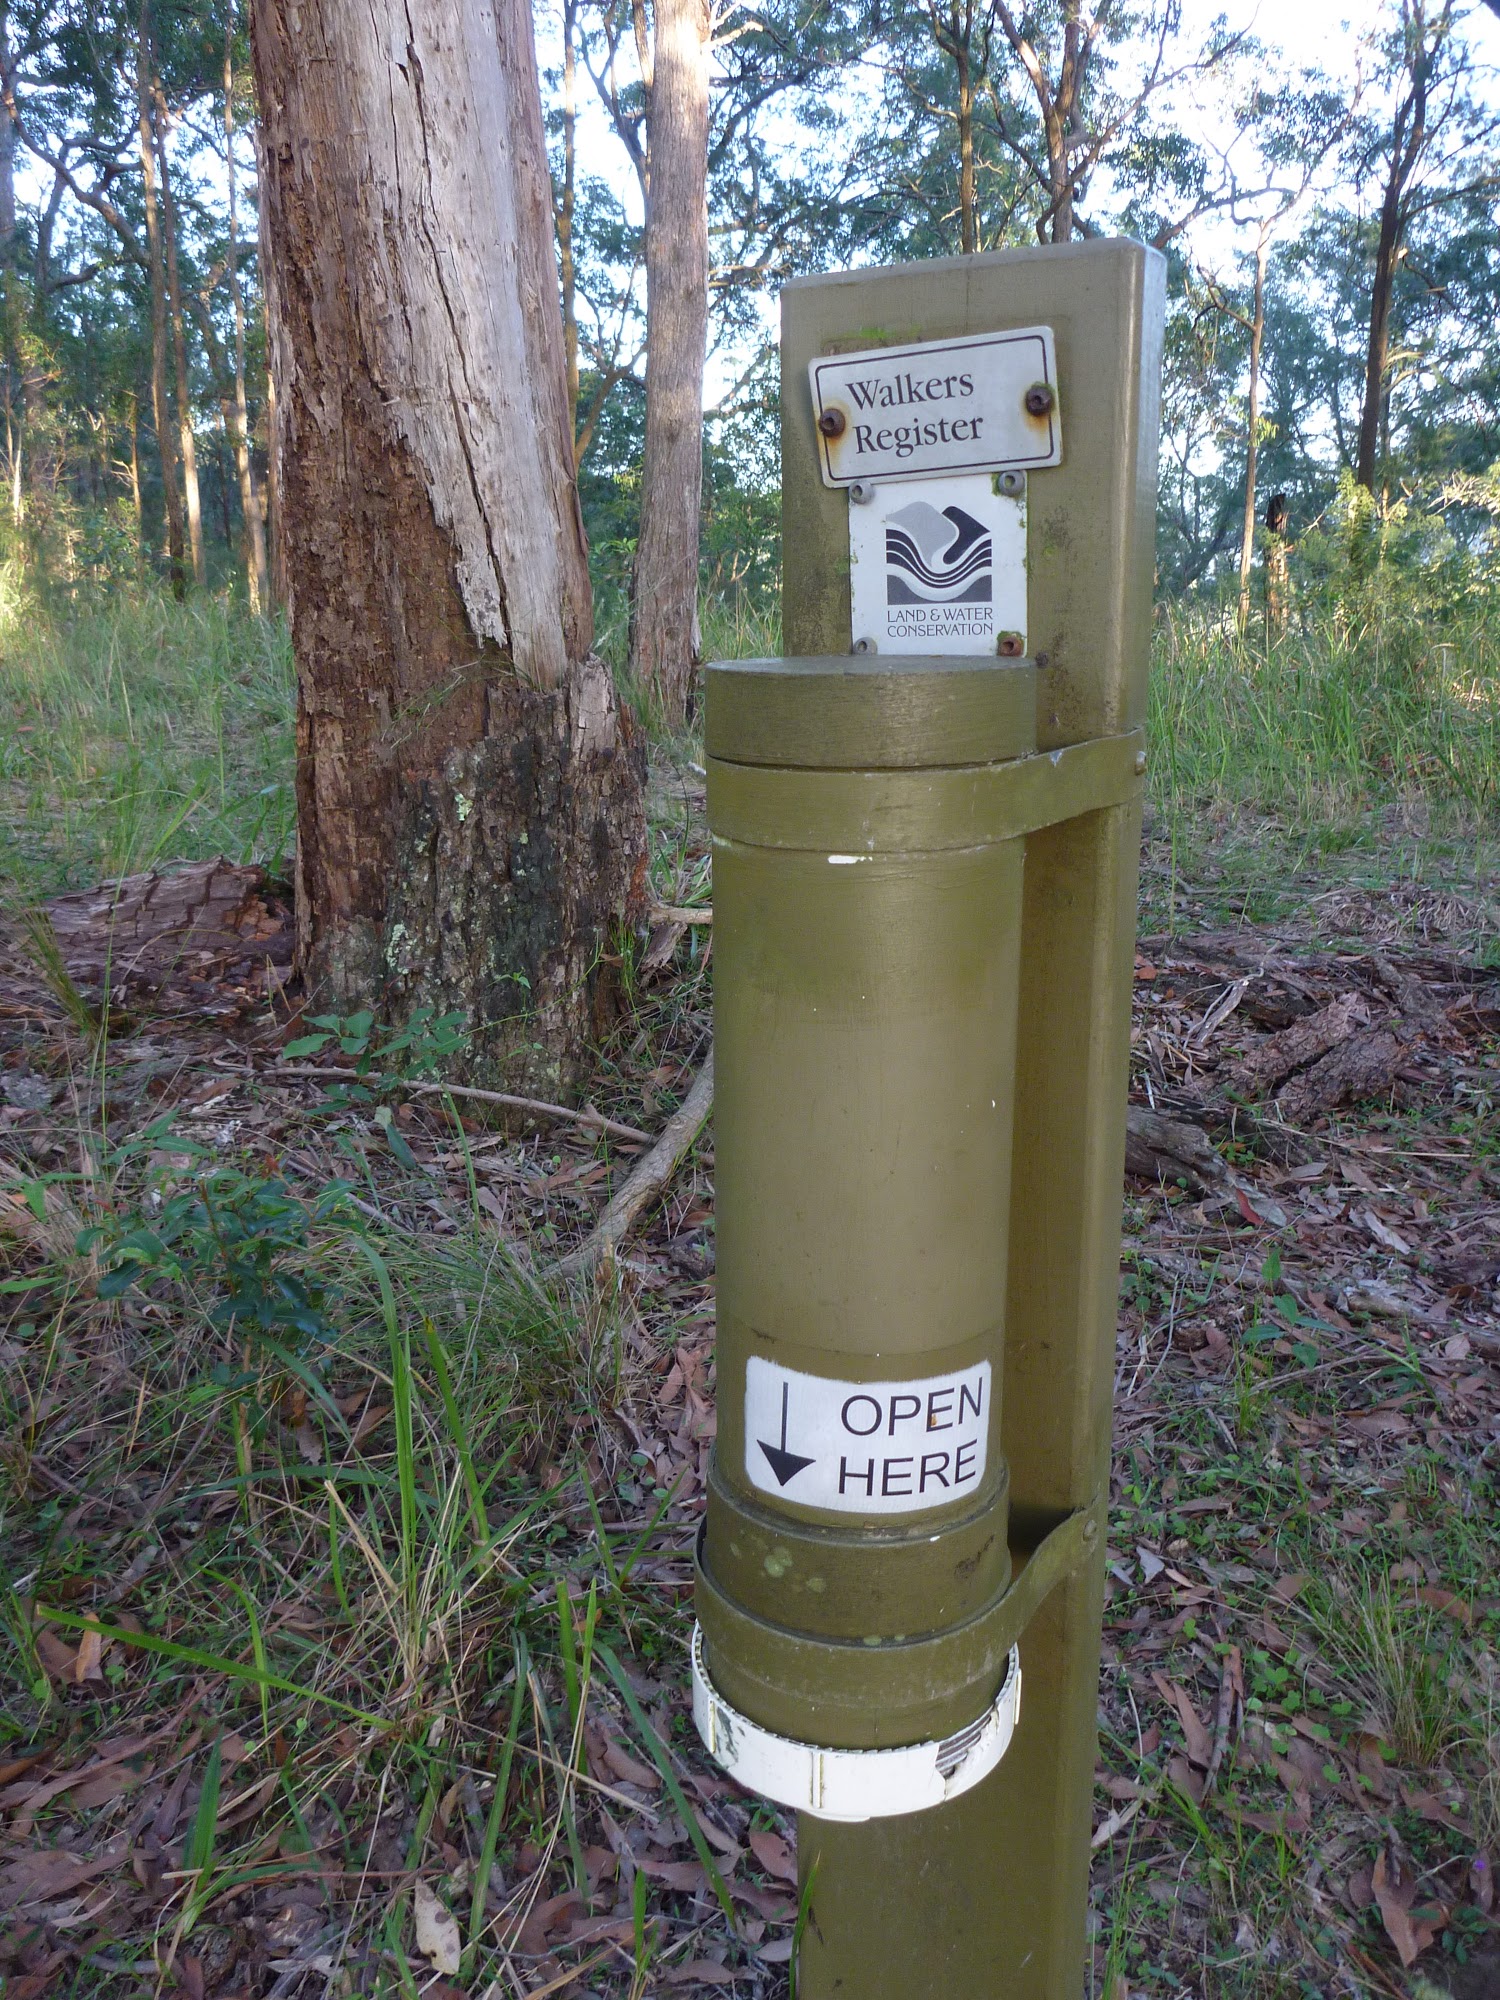 Walkers Registration tube in the Palm Grove NR